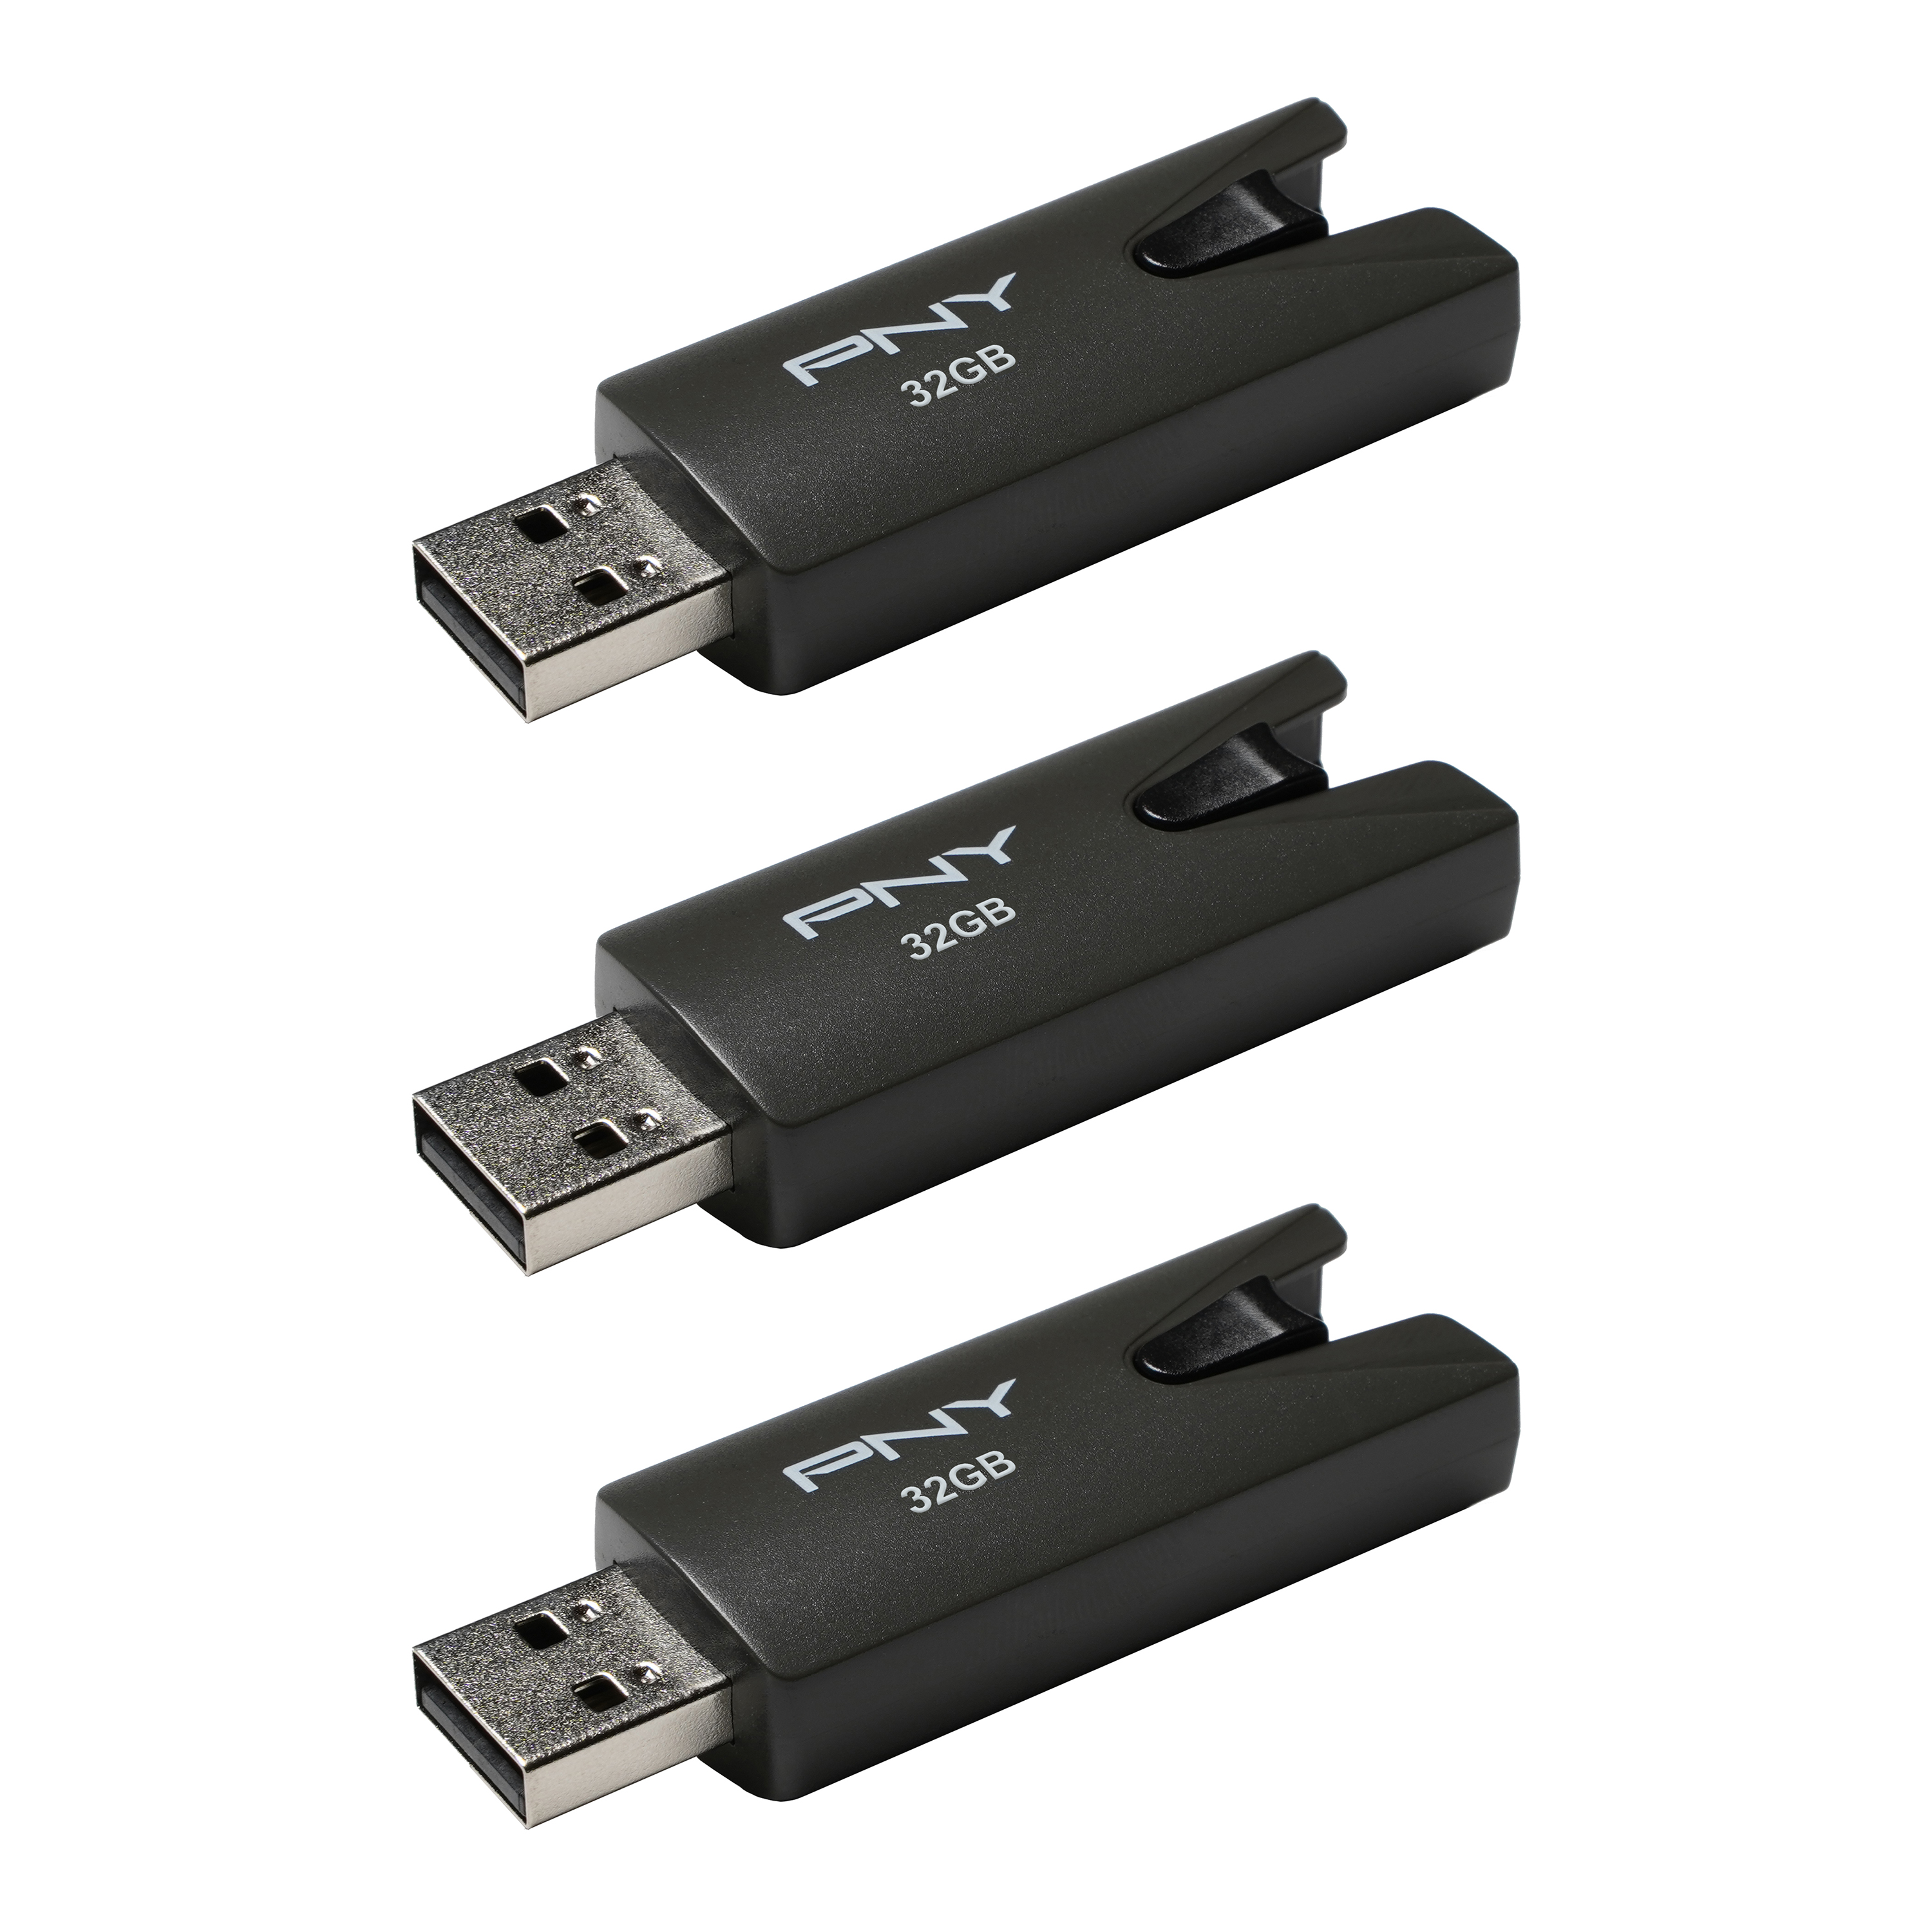 PNY 32GB Attache USB 2.0 Flash Drive, 3-Pack - image 2 of 8